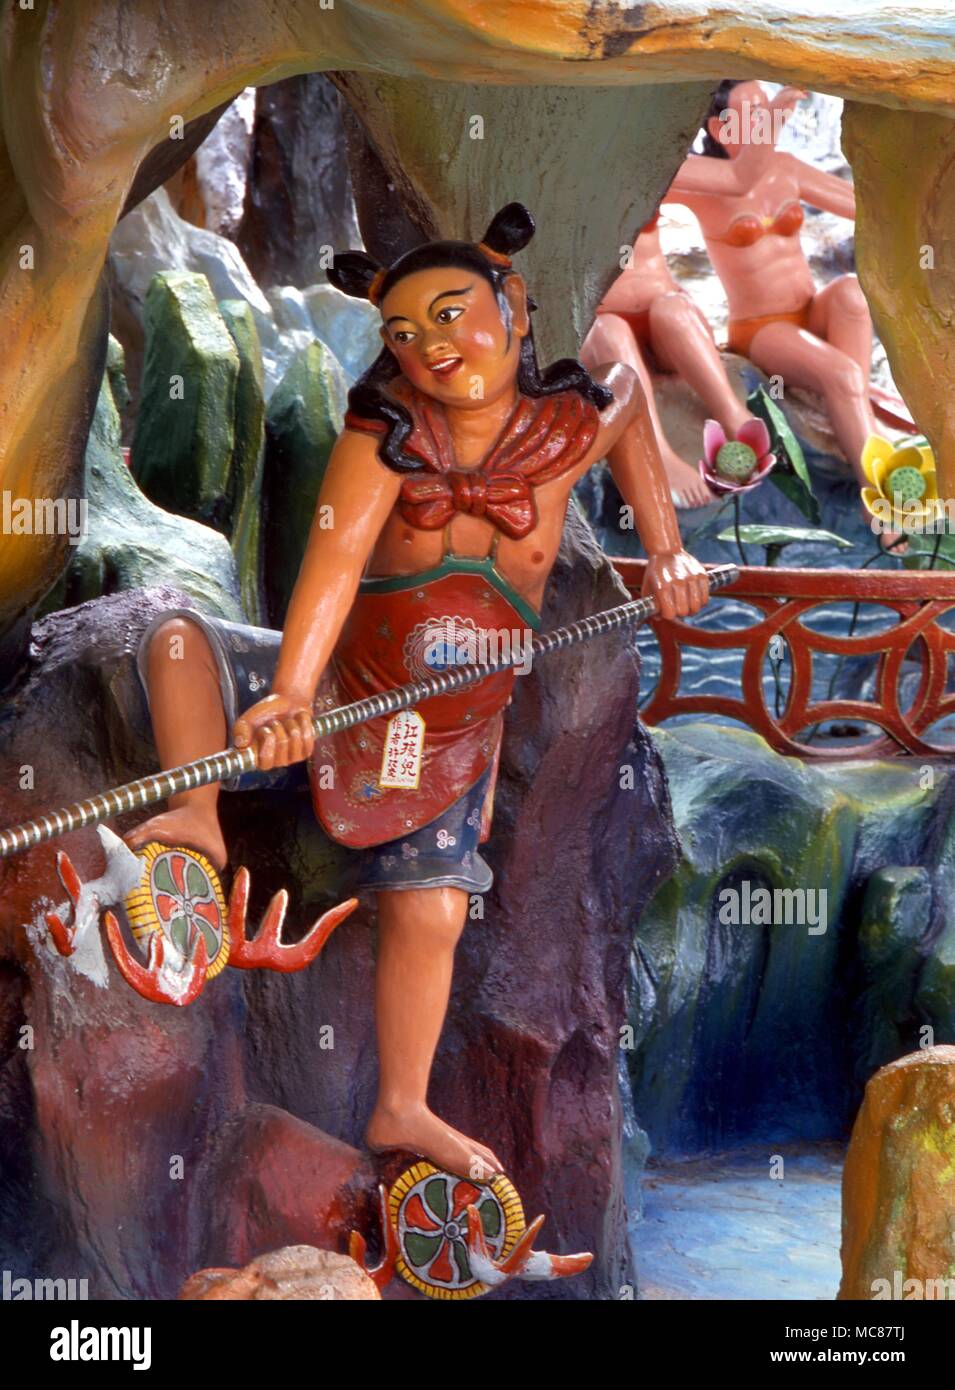 Chinese Mythology Incidents from the Chinese tale of The Journey to the West. From the life size statuary groups in Haw Par Villa Singapore Stock Photo